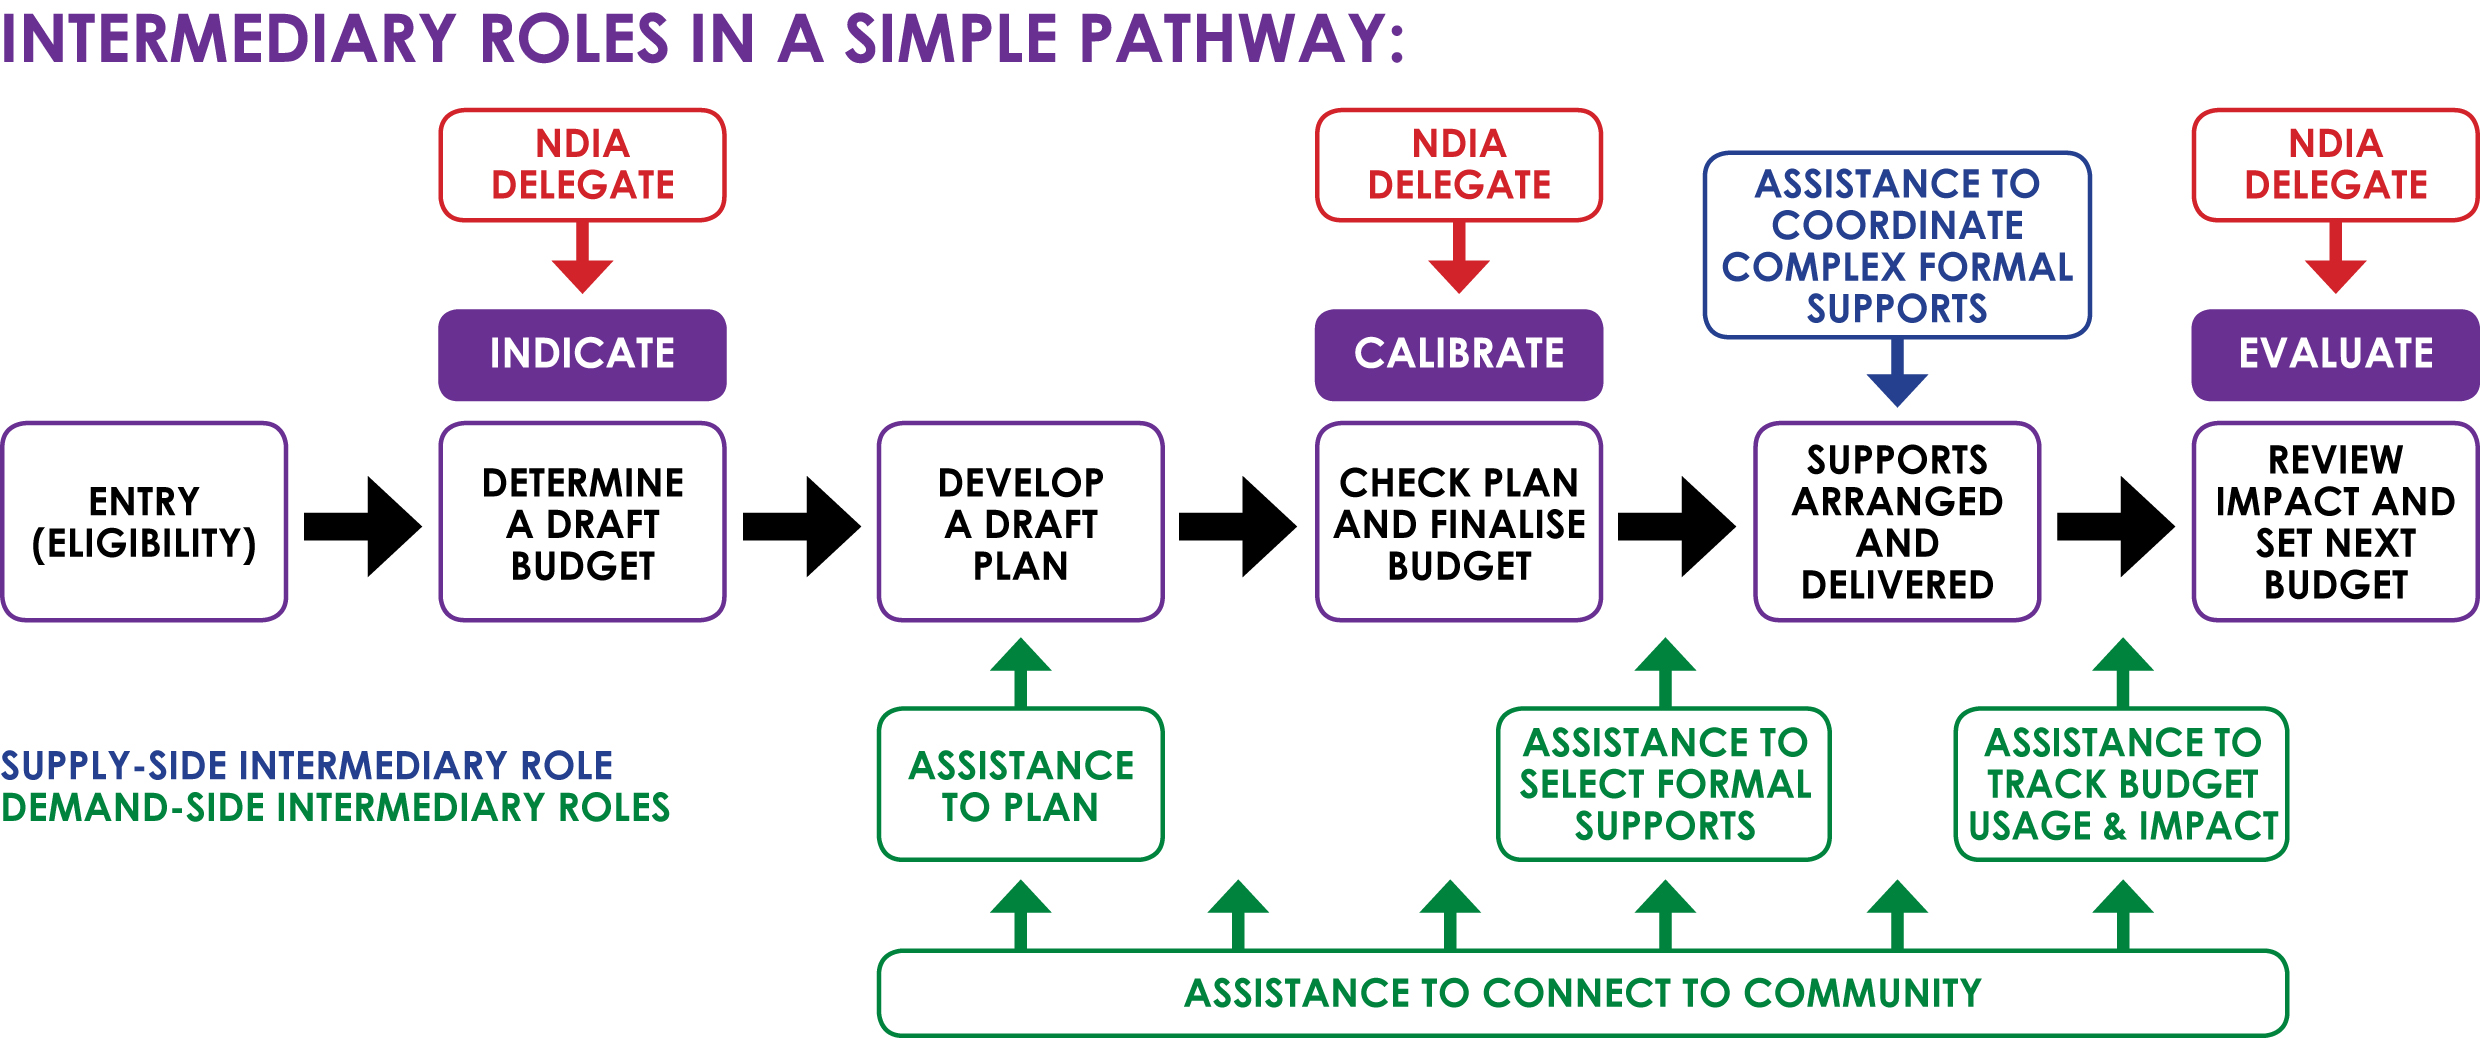 A pathway showing where the intermediary role appears along a simple NDIS participant pathway and how the role elements vary accordingly.